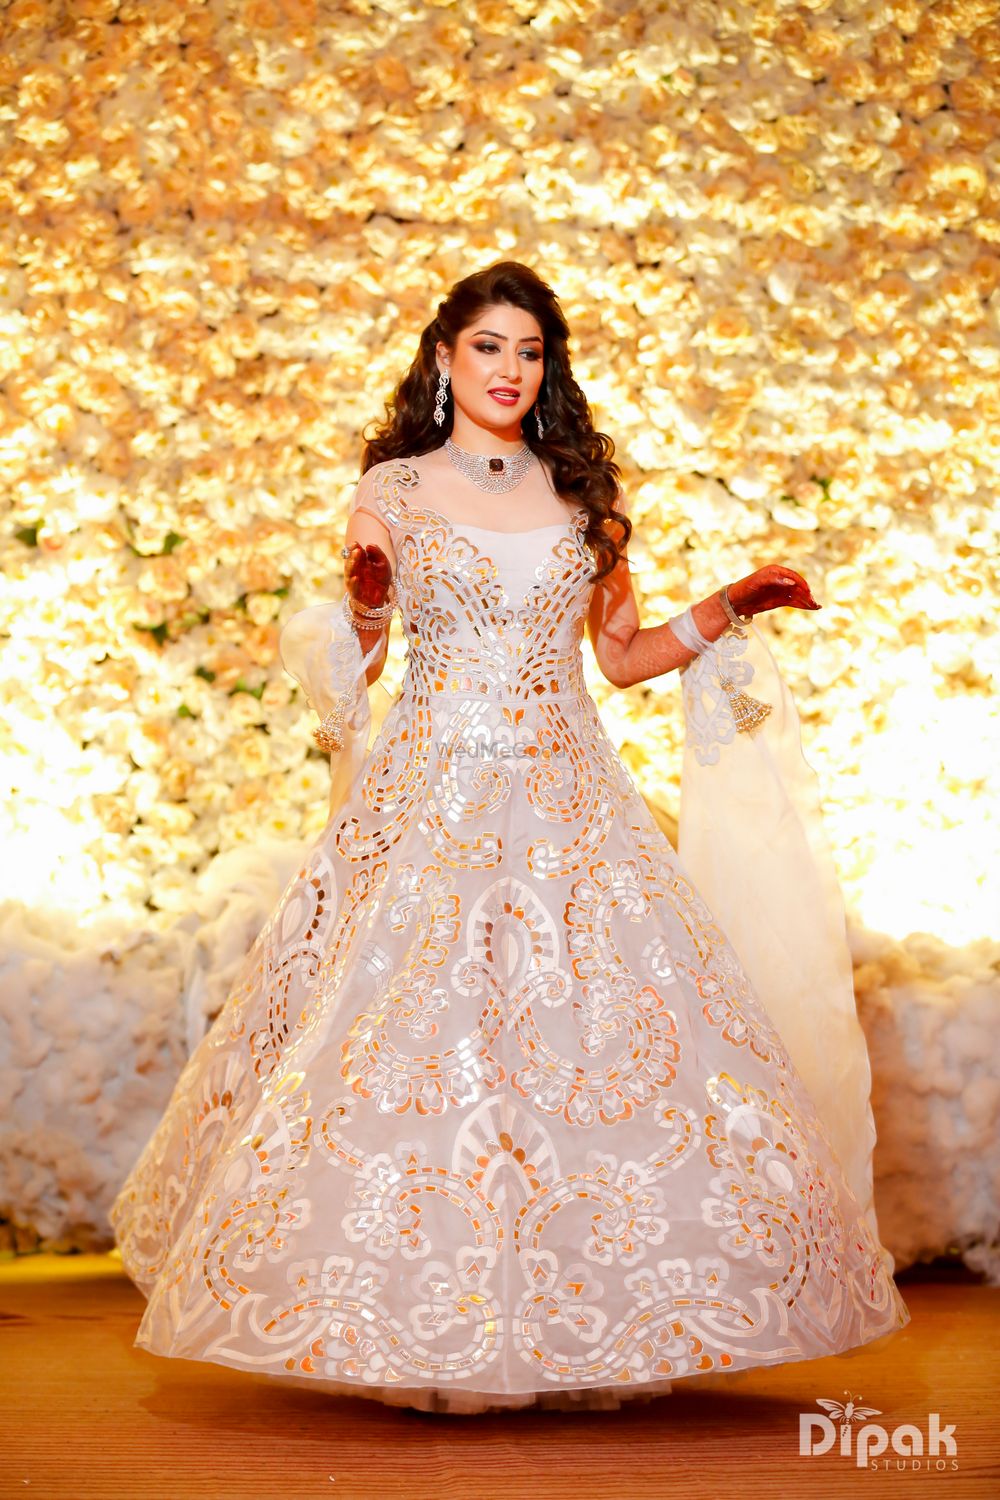 Photo of White and gold cocktail dress for sangeet